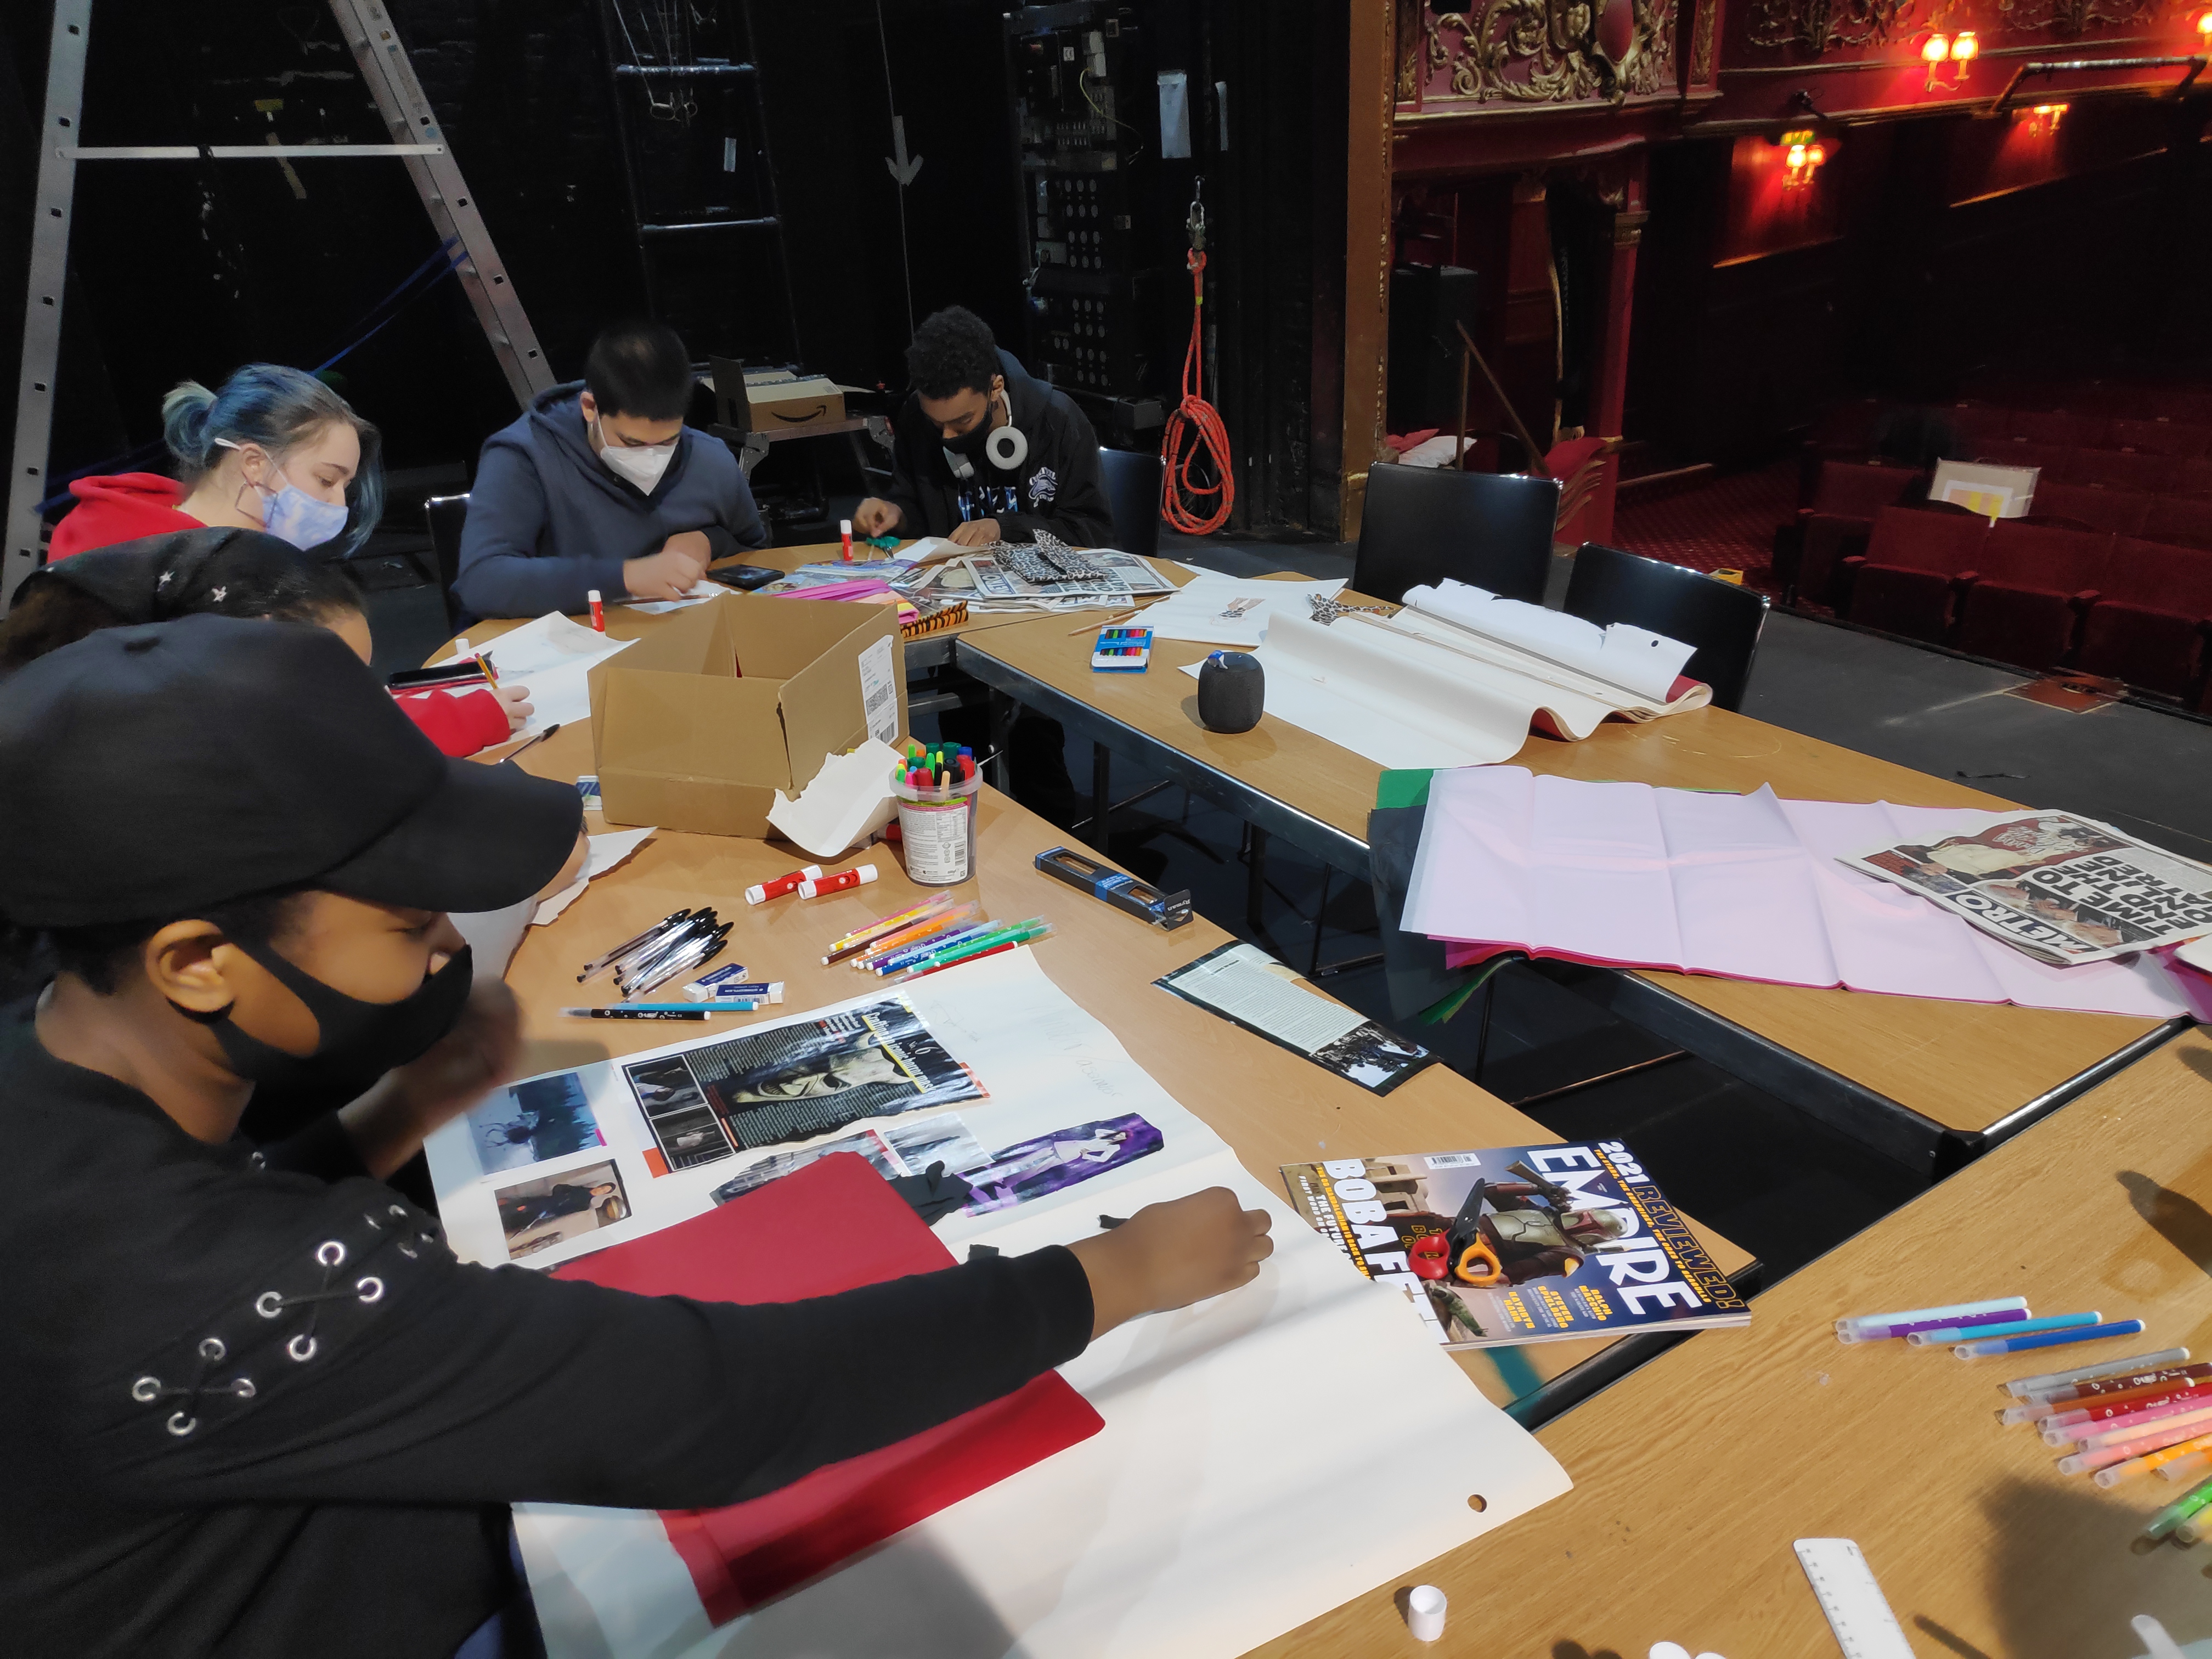 Group photo of Young Technicians sitting at a desk creating costume designs.